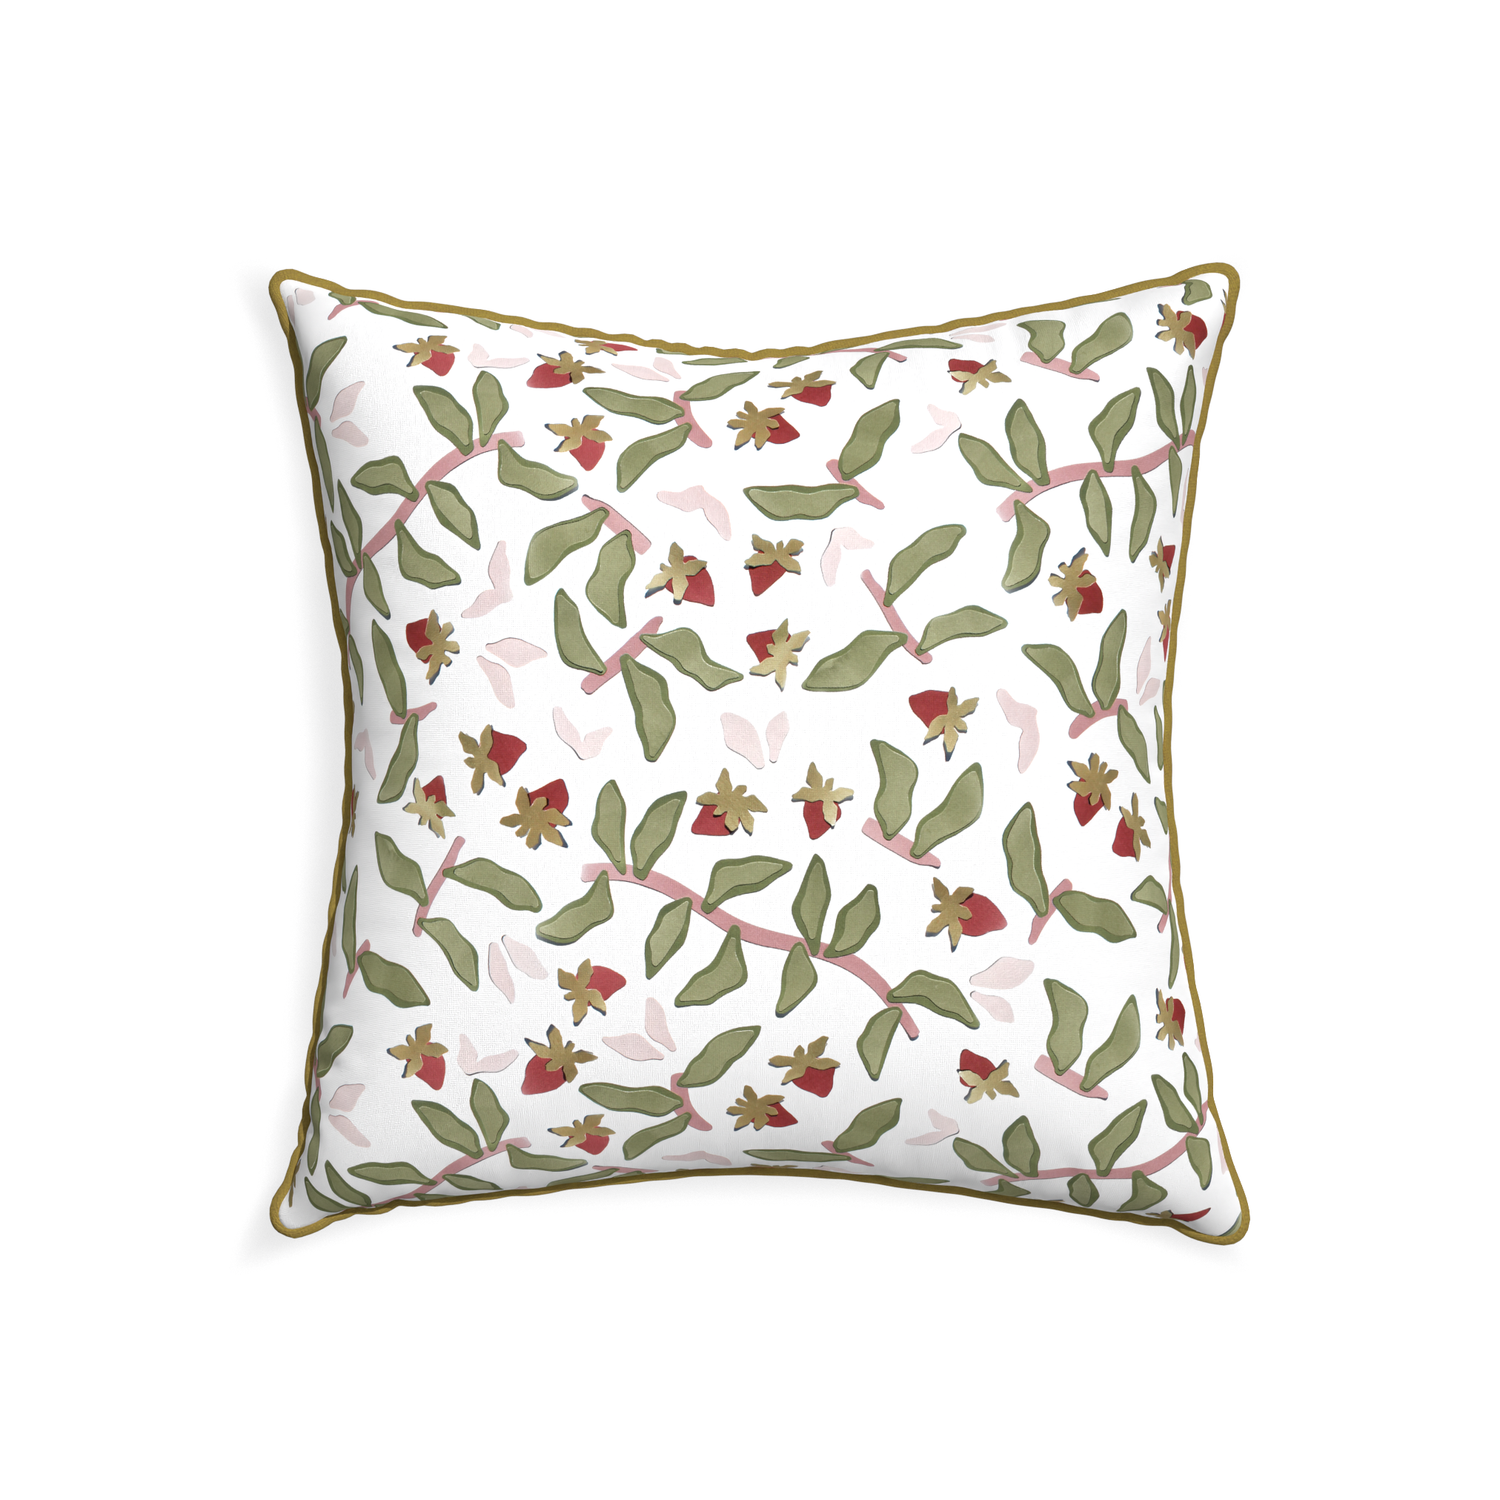 22-square nellie custom strawberry & botanicalpillow with c piping on white background